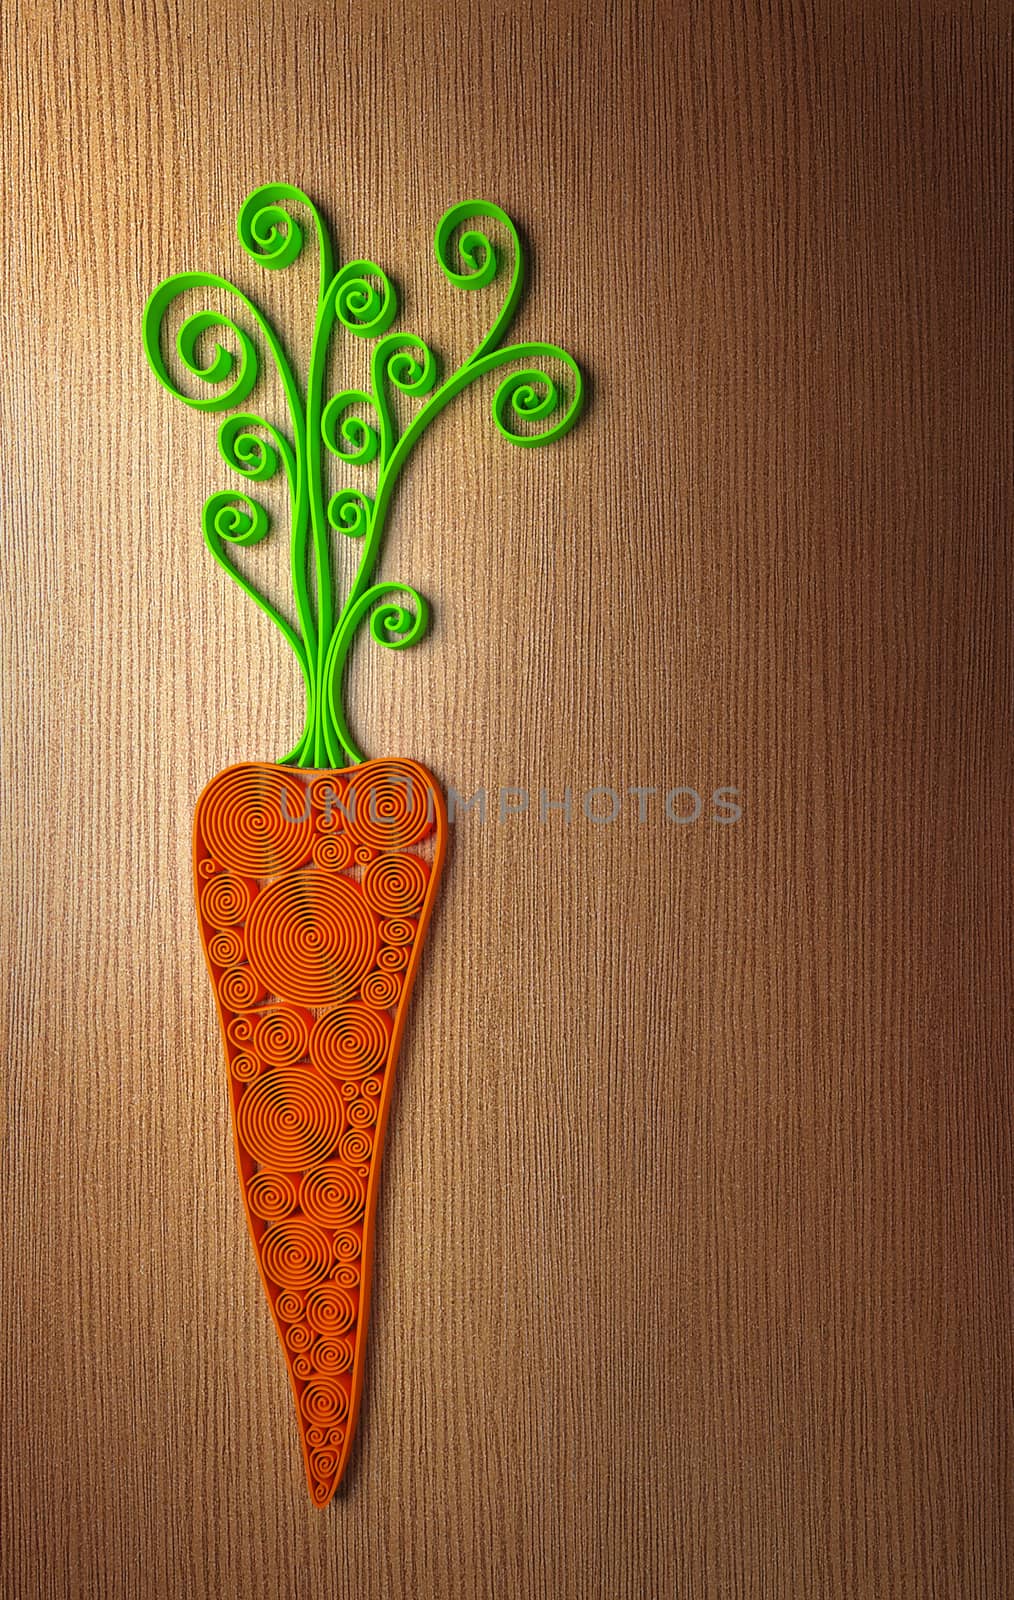 Quilling stylized 3D carrot illustration over wooden table